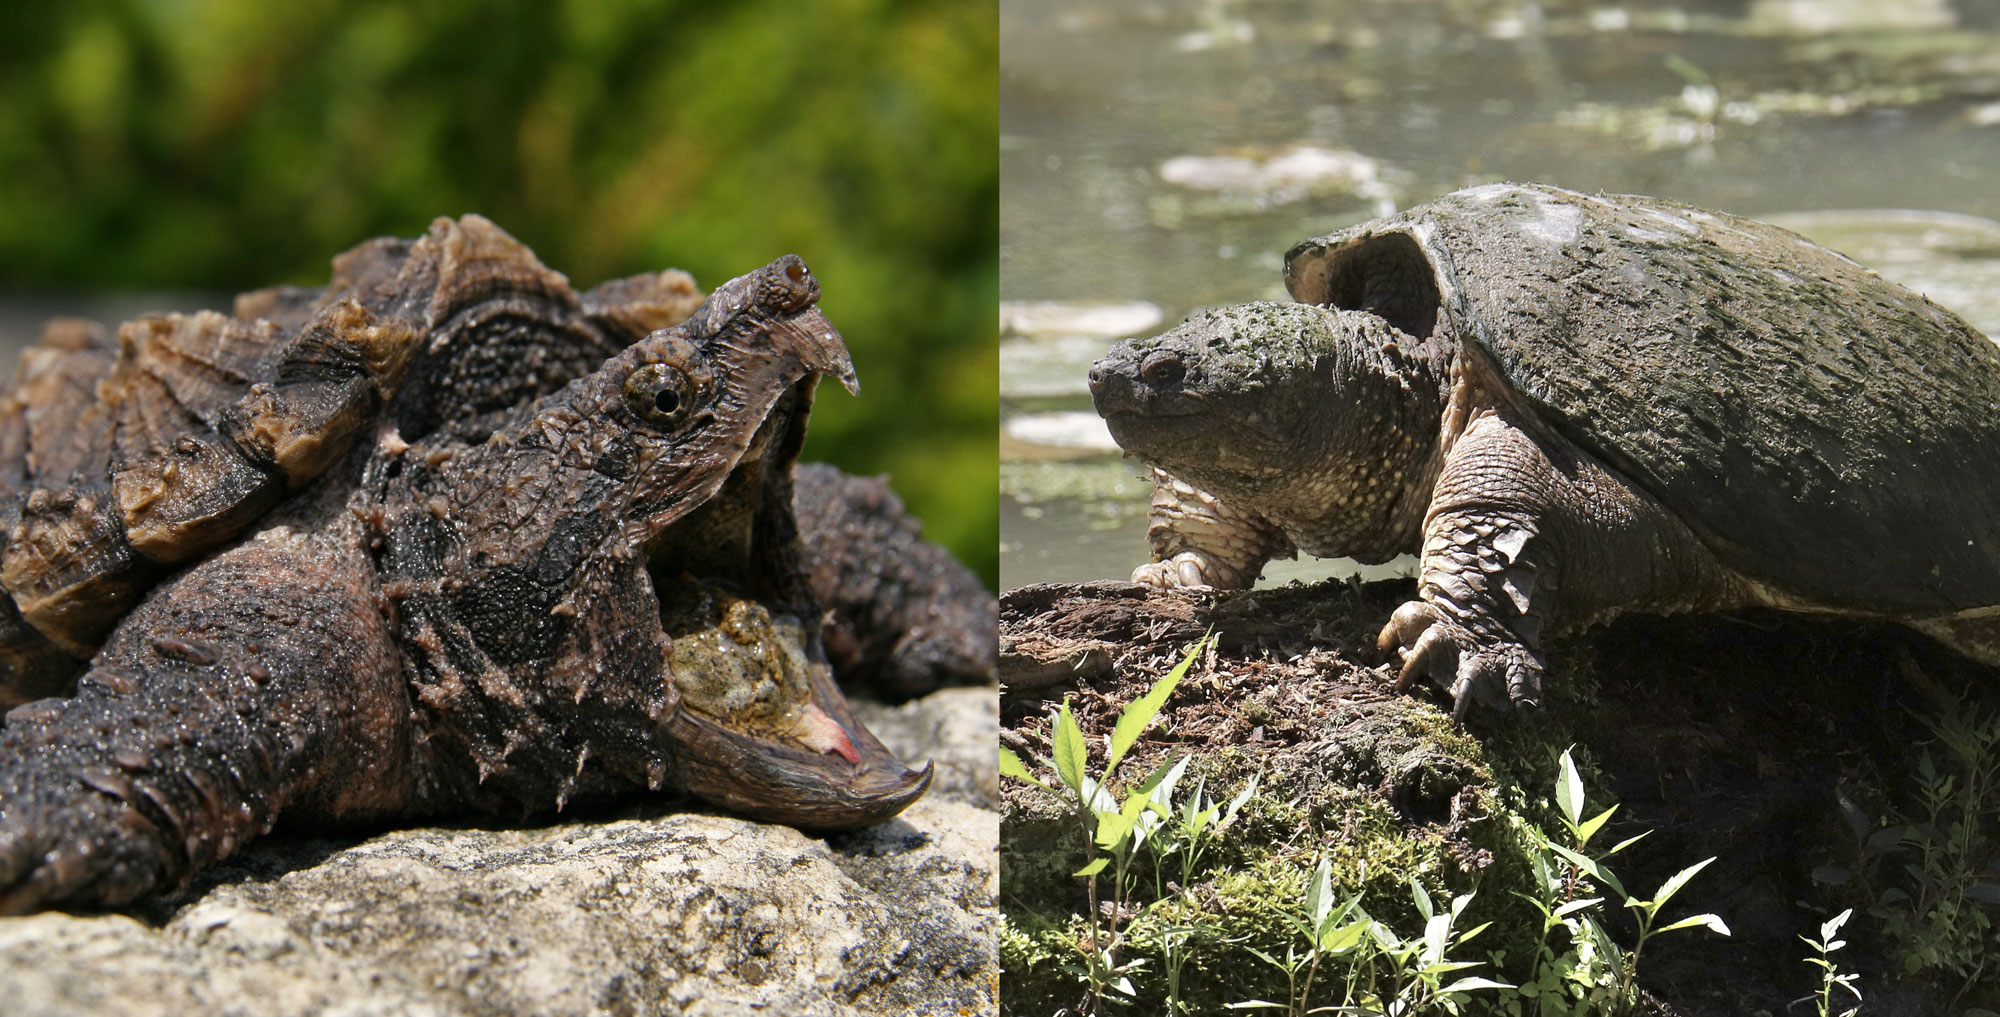 An alligator snapping turtle and a common snapping turtle side by side.